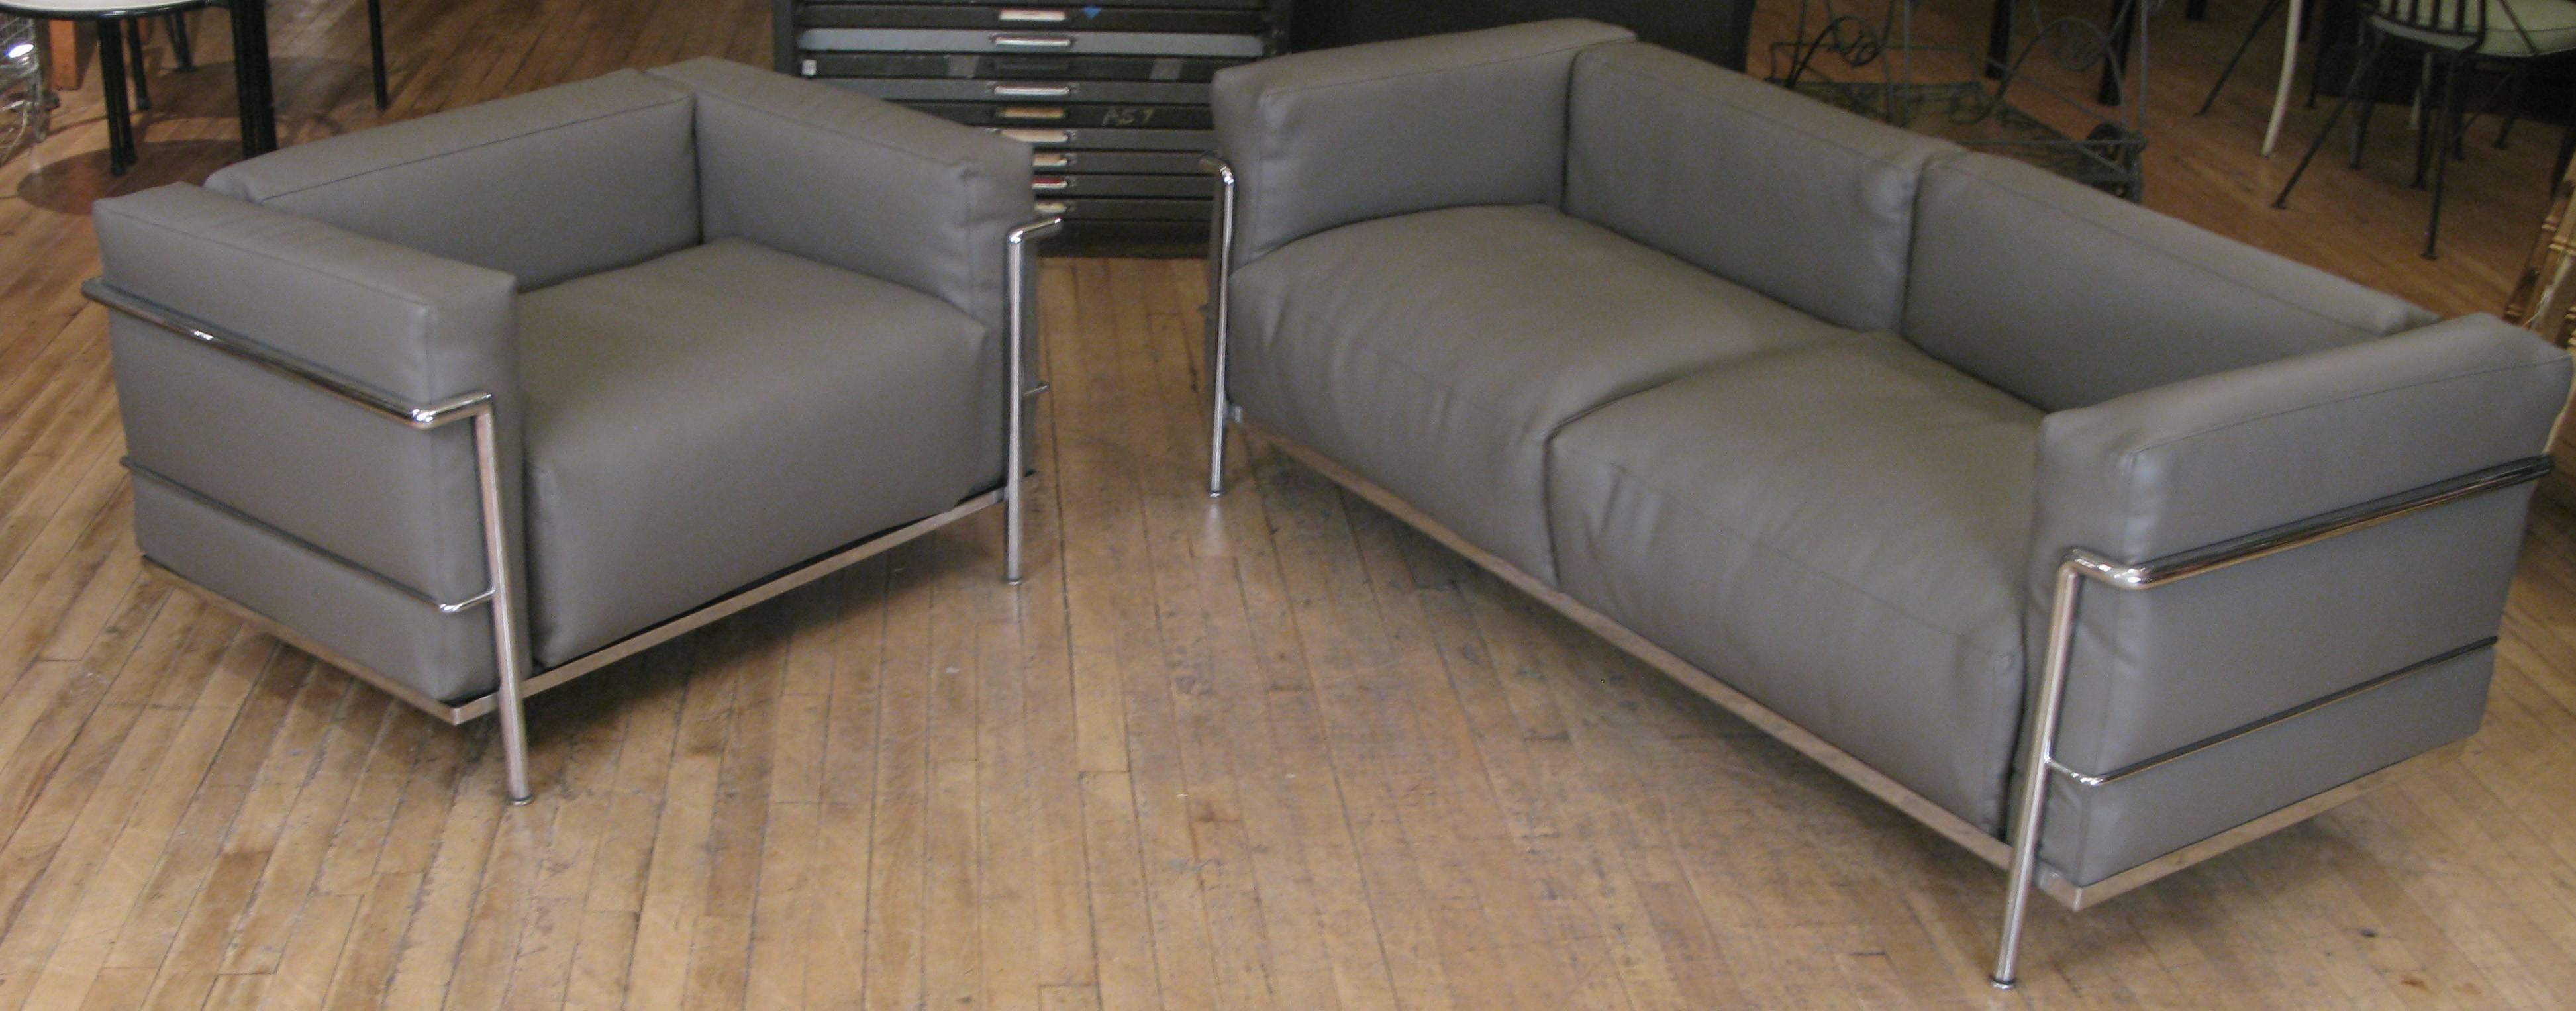 A vintage 1960s tubular chrome sofa and 'grand confort' LC3 lounge chair designed by Corbusier and made in Italy by Cassina. Both pieces reupholstered in recycled leather in a very nice greige color. 

Chair dimensions: 39